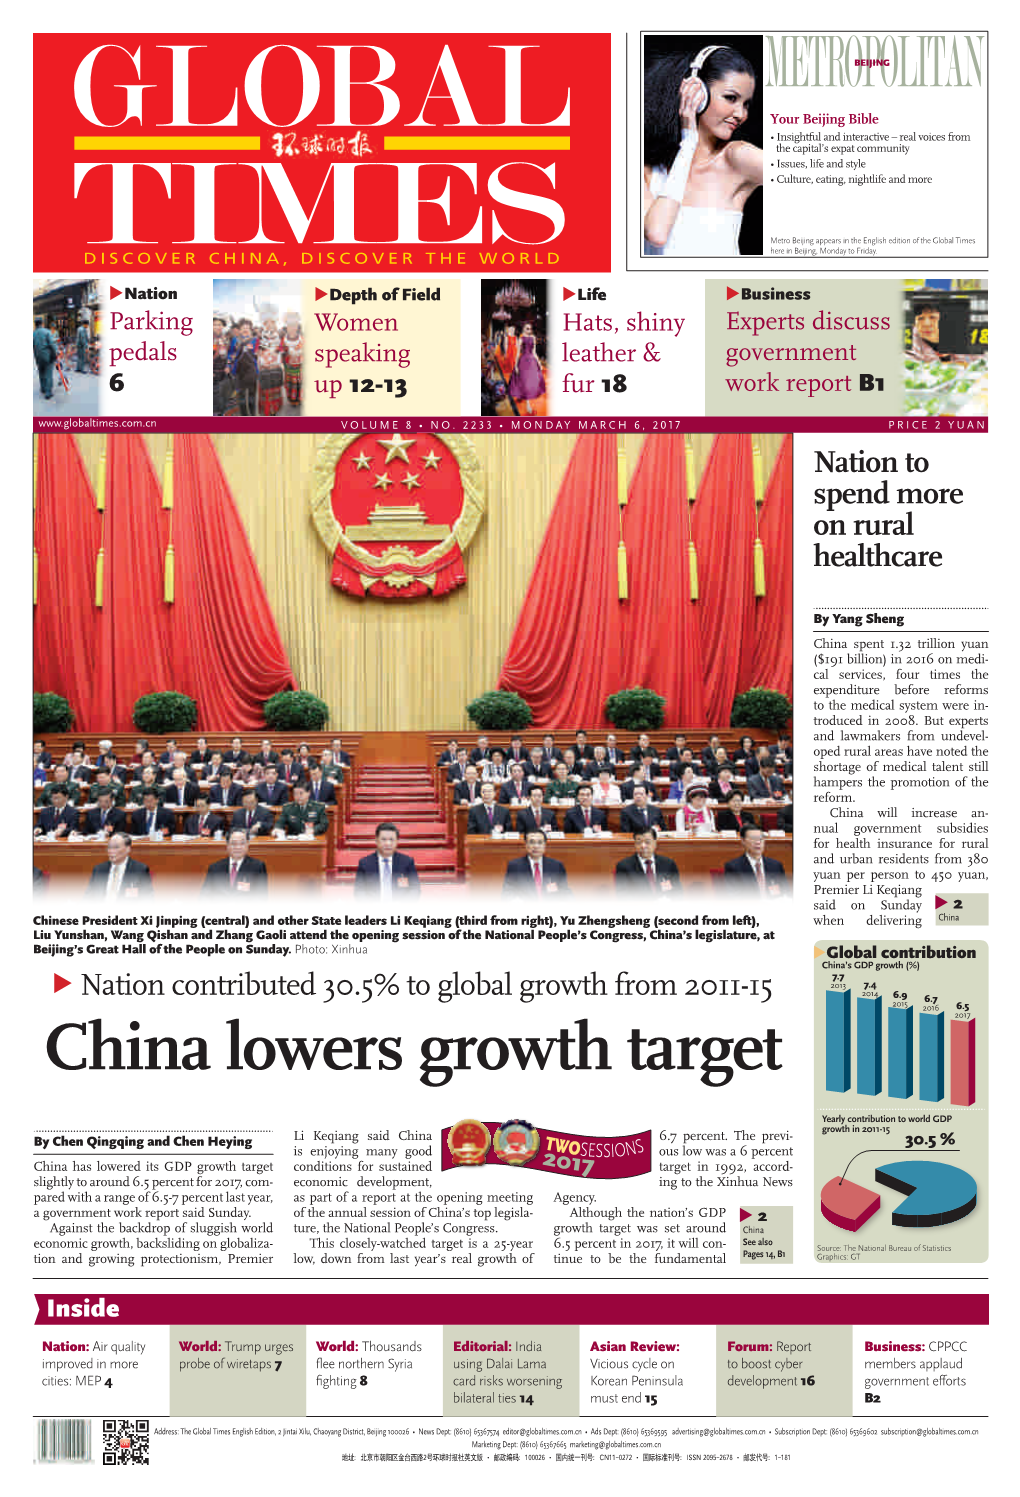 China Lowers Growth Target